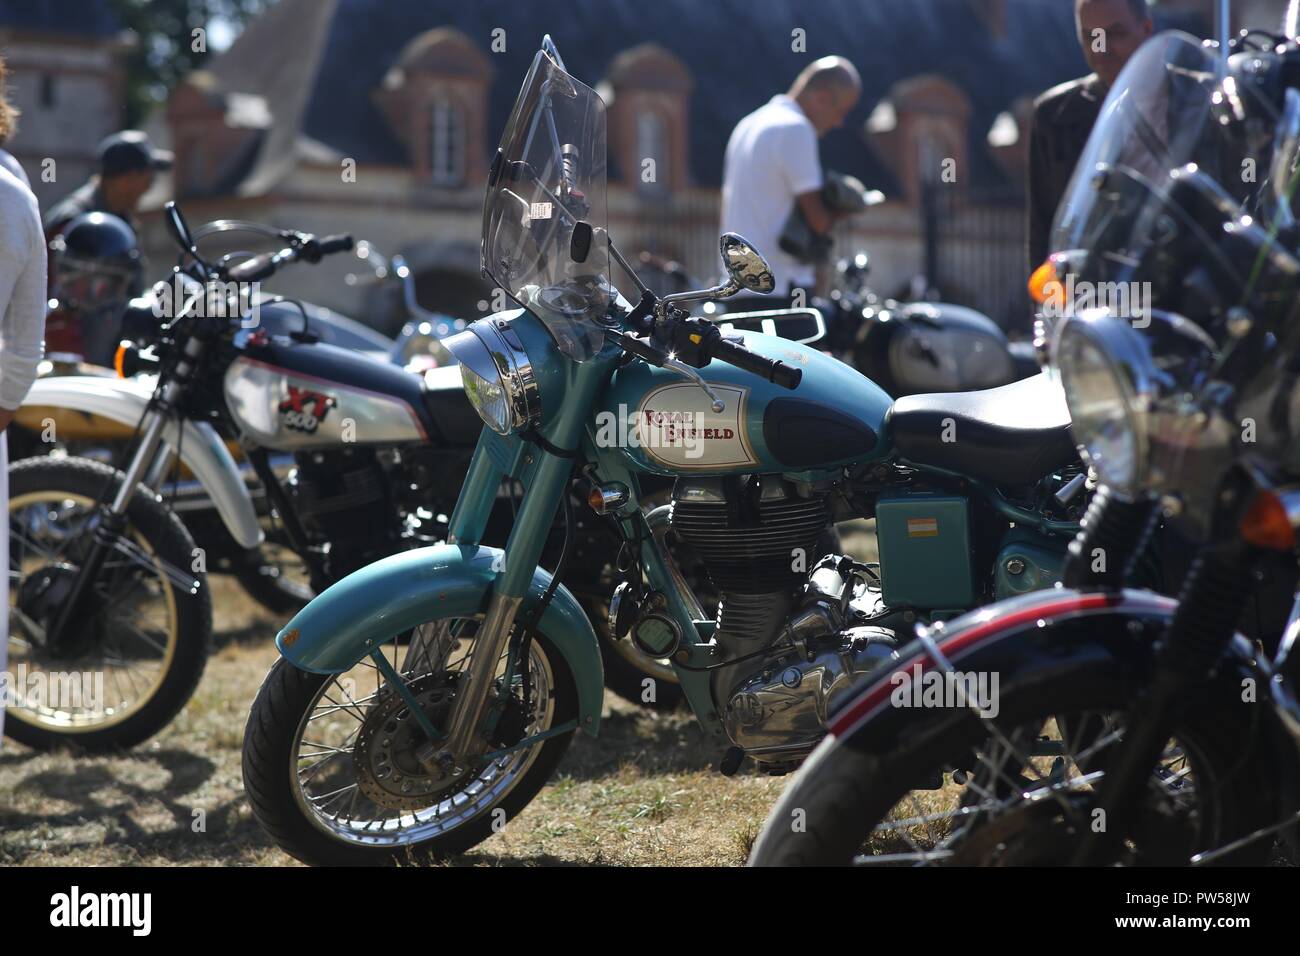 Royal Enfield being admired at Château de Neuville in Gambais (78) – France. Stock Photo